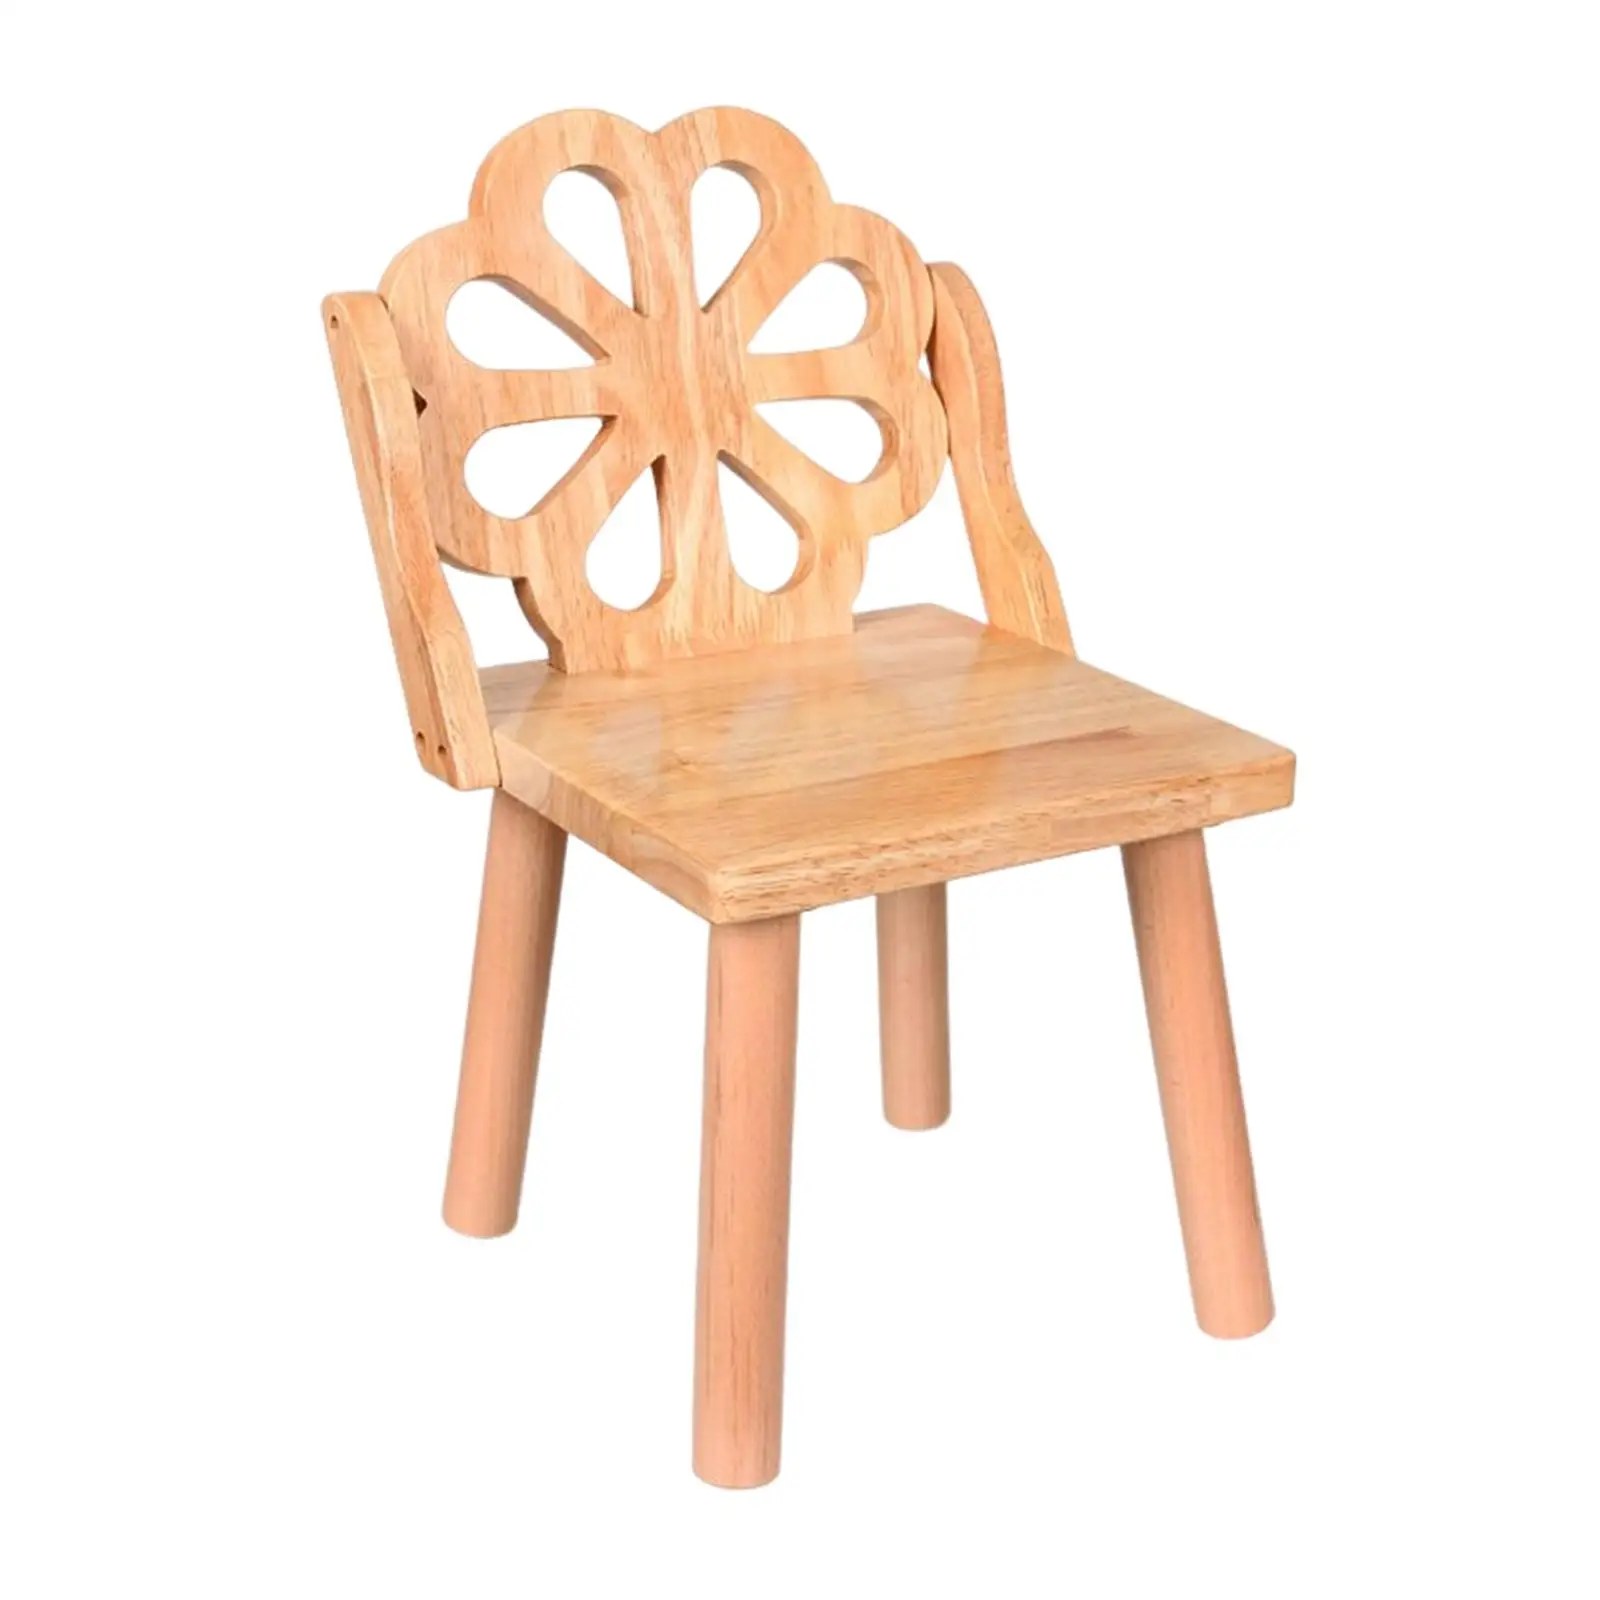 Wooden Removable Wooden Child Stool Space Saving Small Seat Stool for Kids for Home